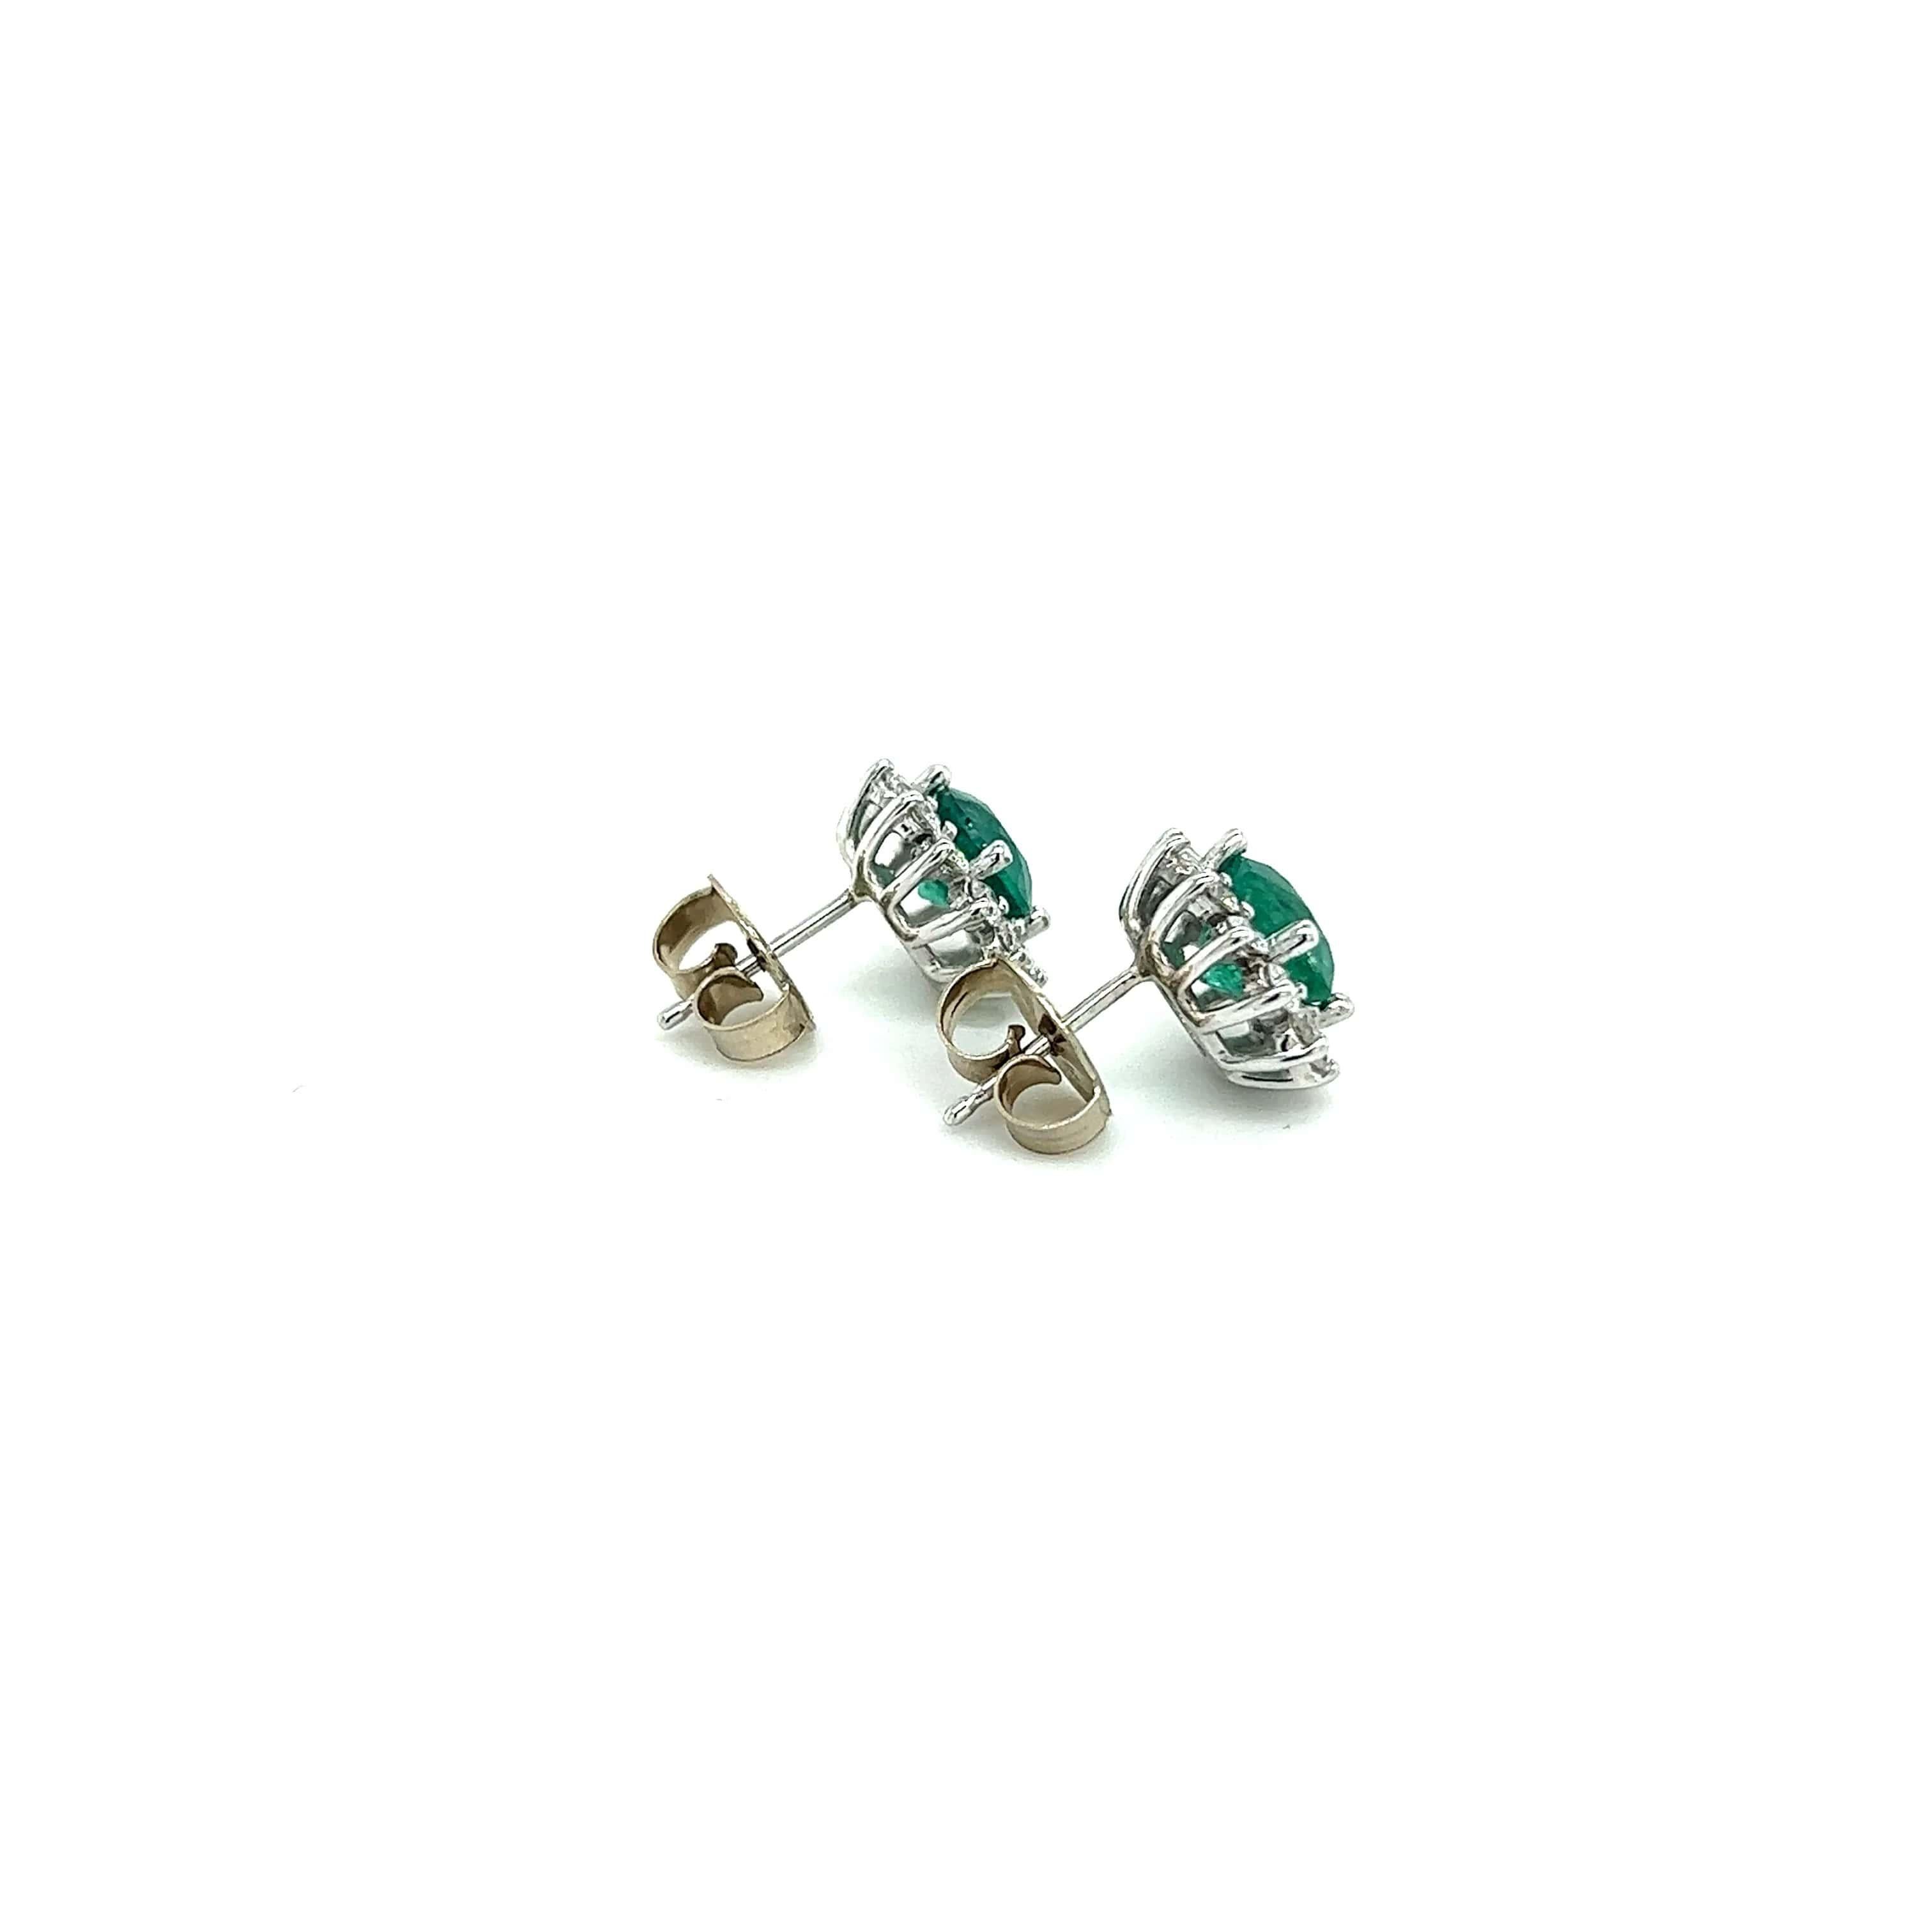 Natural Emerald Diamond Stud Earrings 14k W Gold 3.14 TCW Certified $3,950 307913

Nothing says, “I Love you” more than Diamonds and Pearls!

These Emerald earrings have been Certified, Inspected, and Appraised by Gemological Appraisal